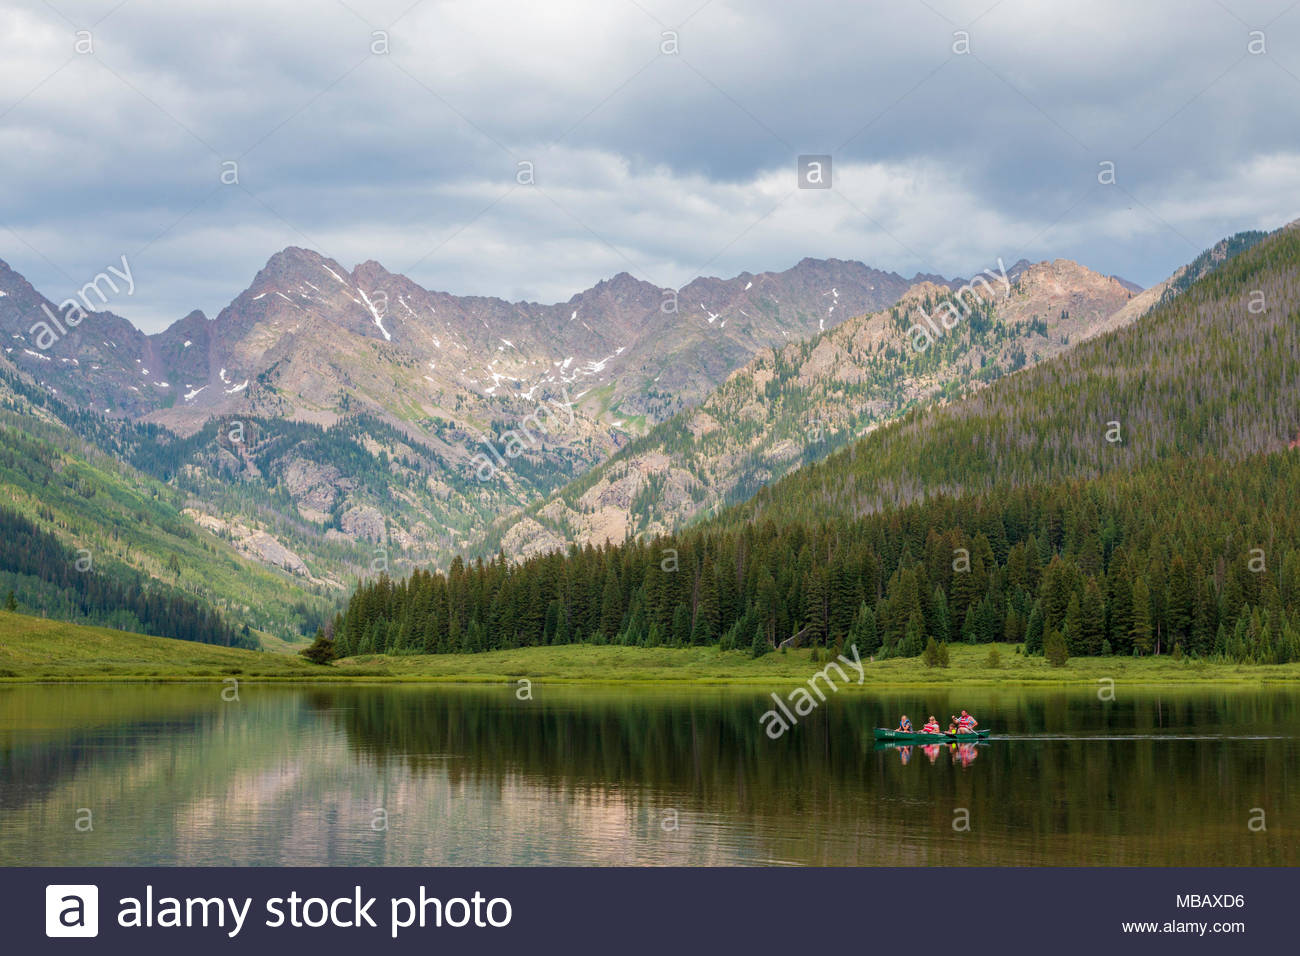 A Family Paddles Their Canoe Across Piney Lake With Mountains In